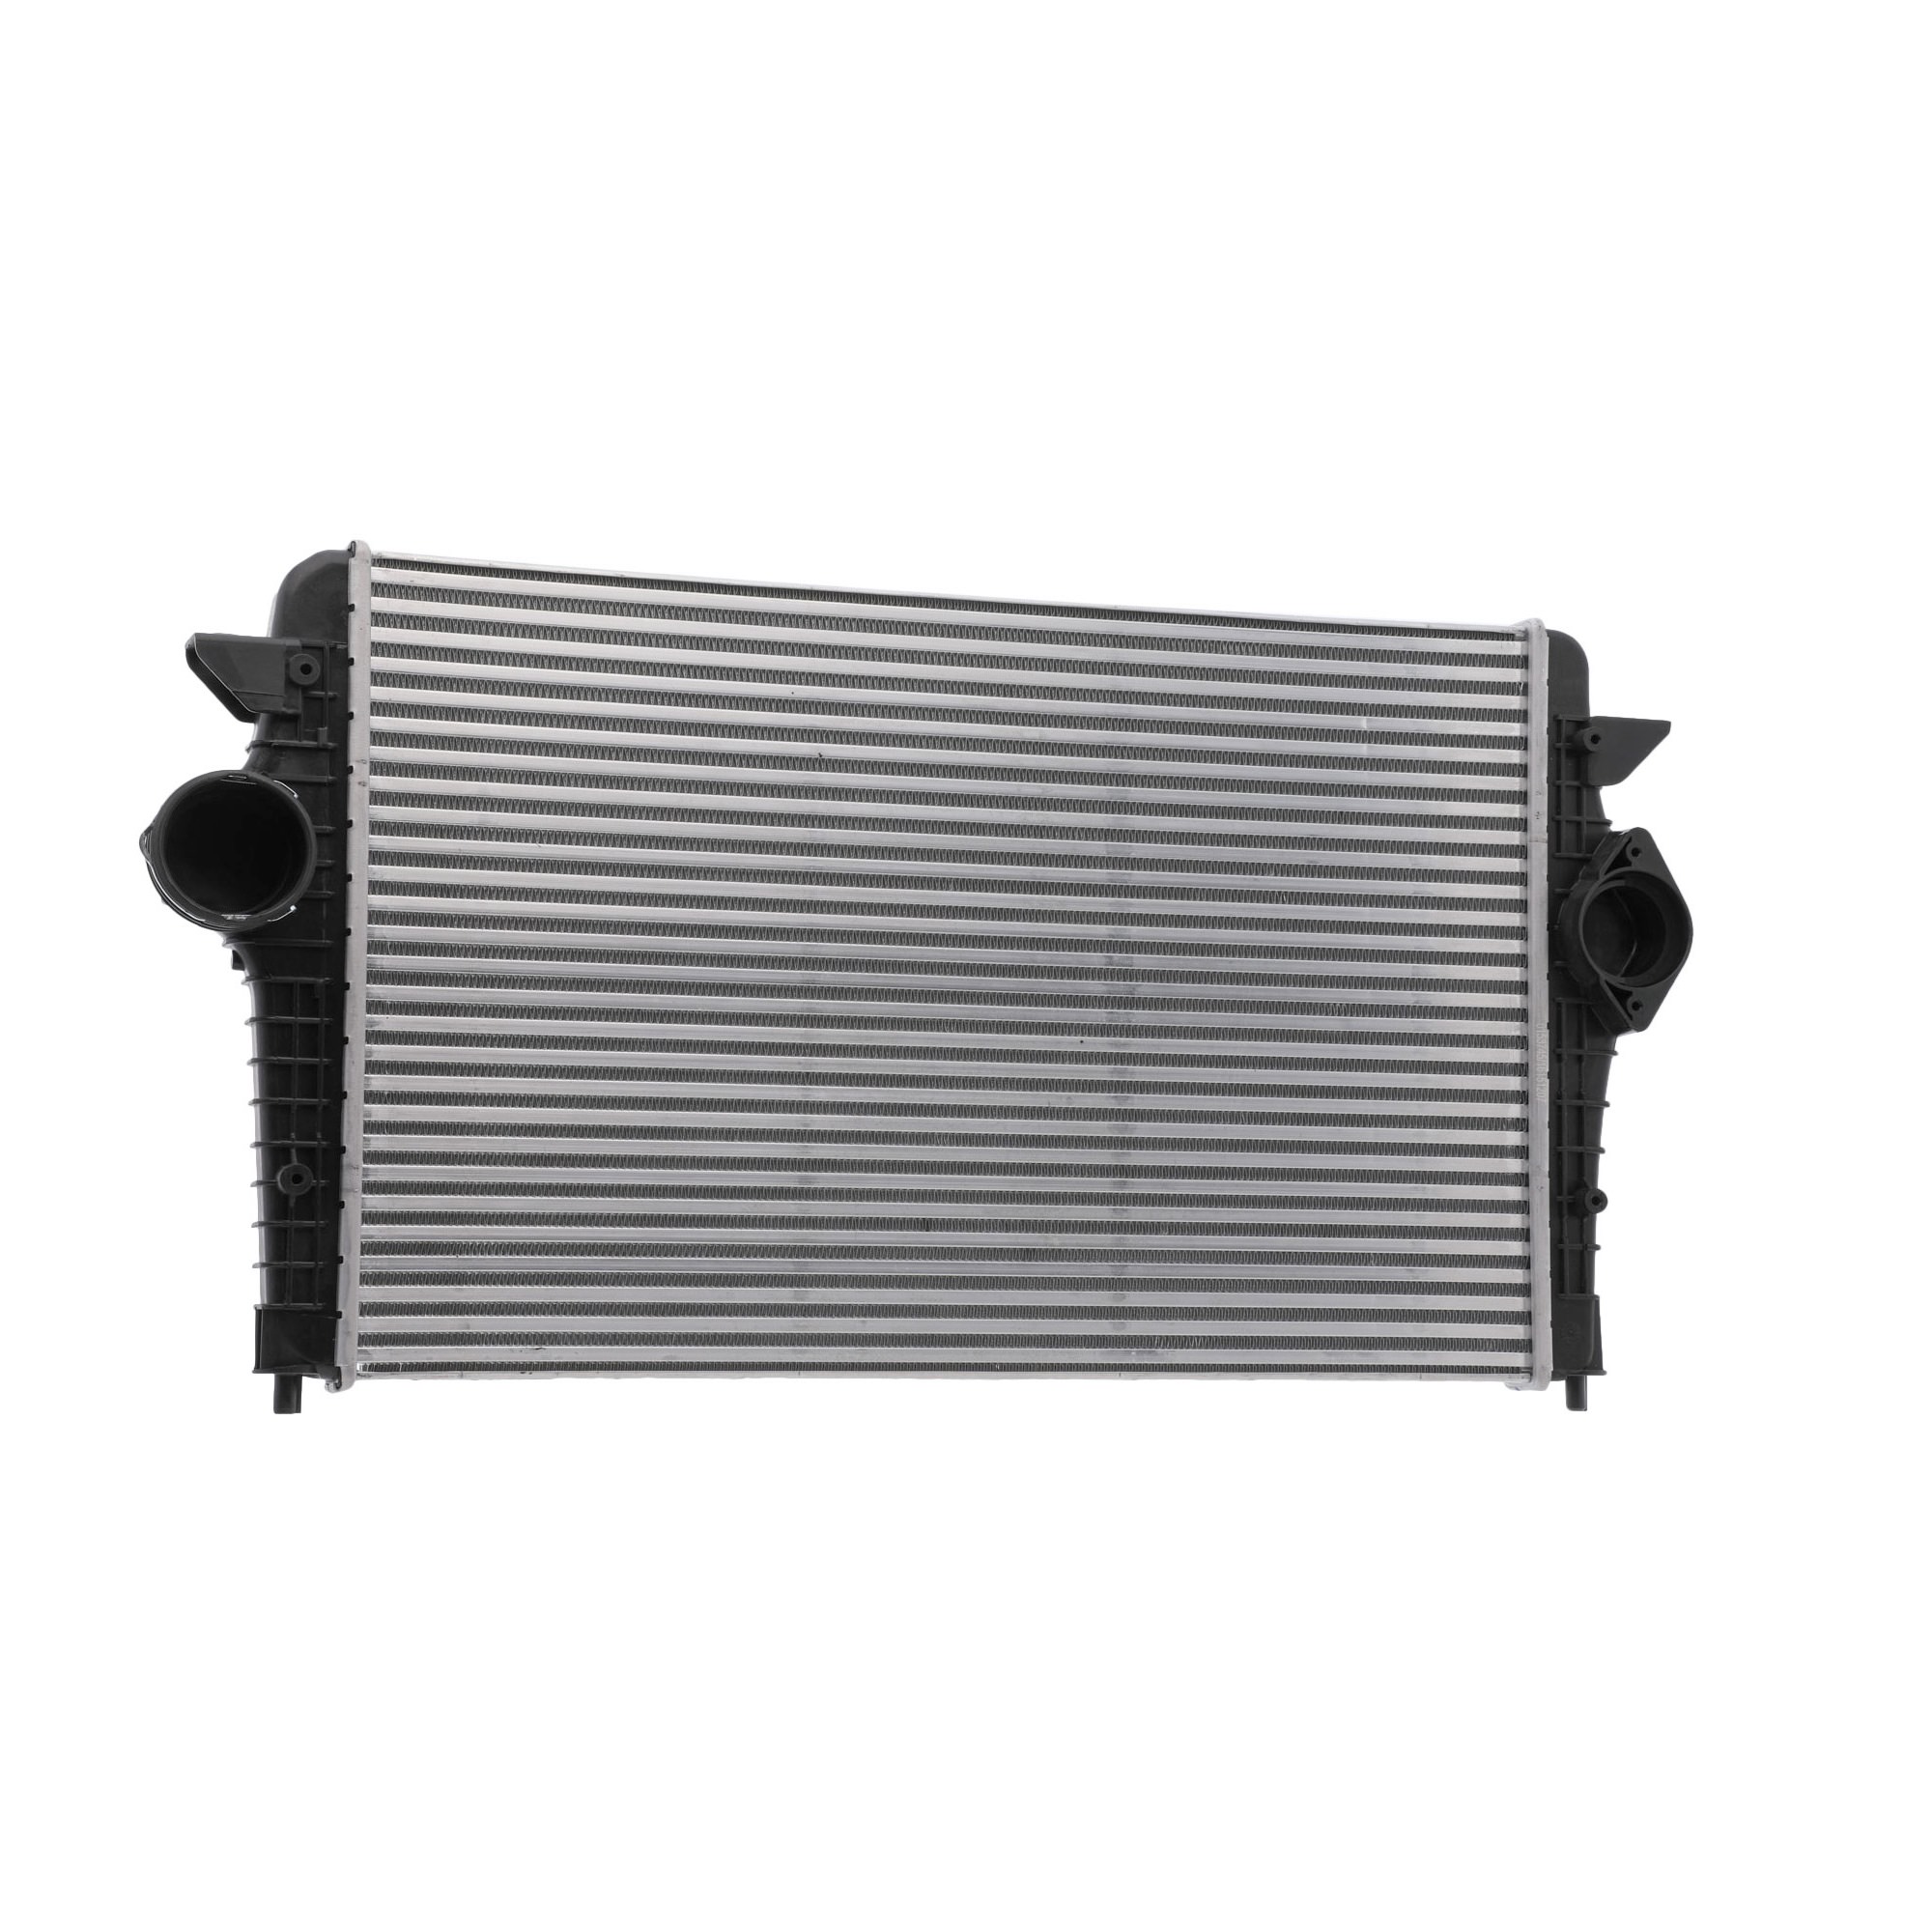 Ford MONDEO Intercooler charger 16151207 STARK SKICC-0890443 online buy